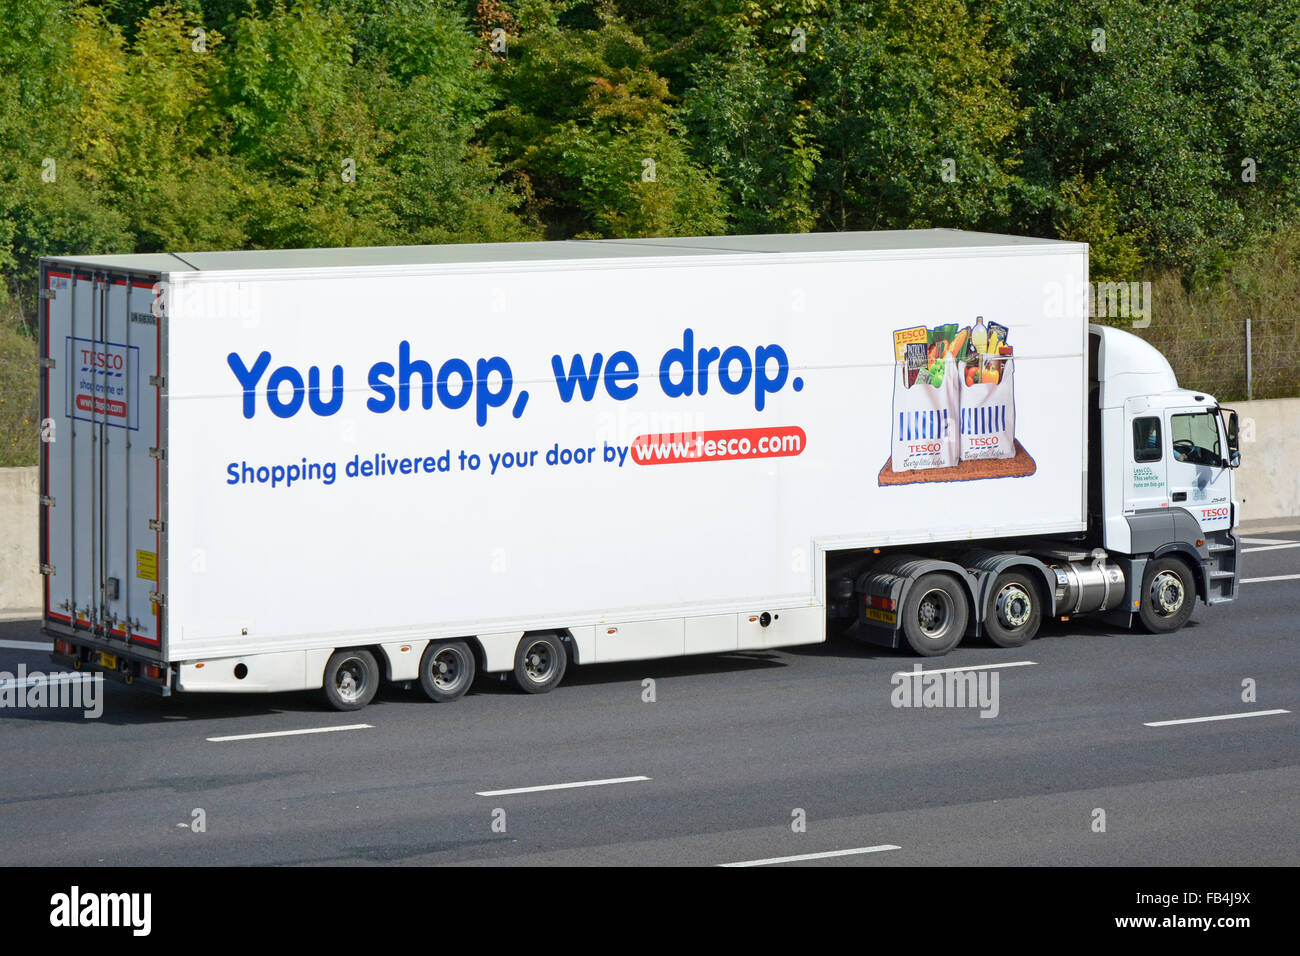 Side view hgv supermarket food store supply chain grocery lorry truck with trailer advertising Tesco home food delivery business driving UK motorway Stock Photo